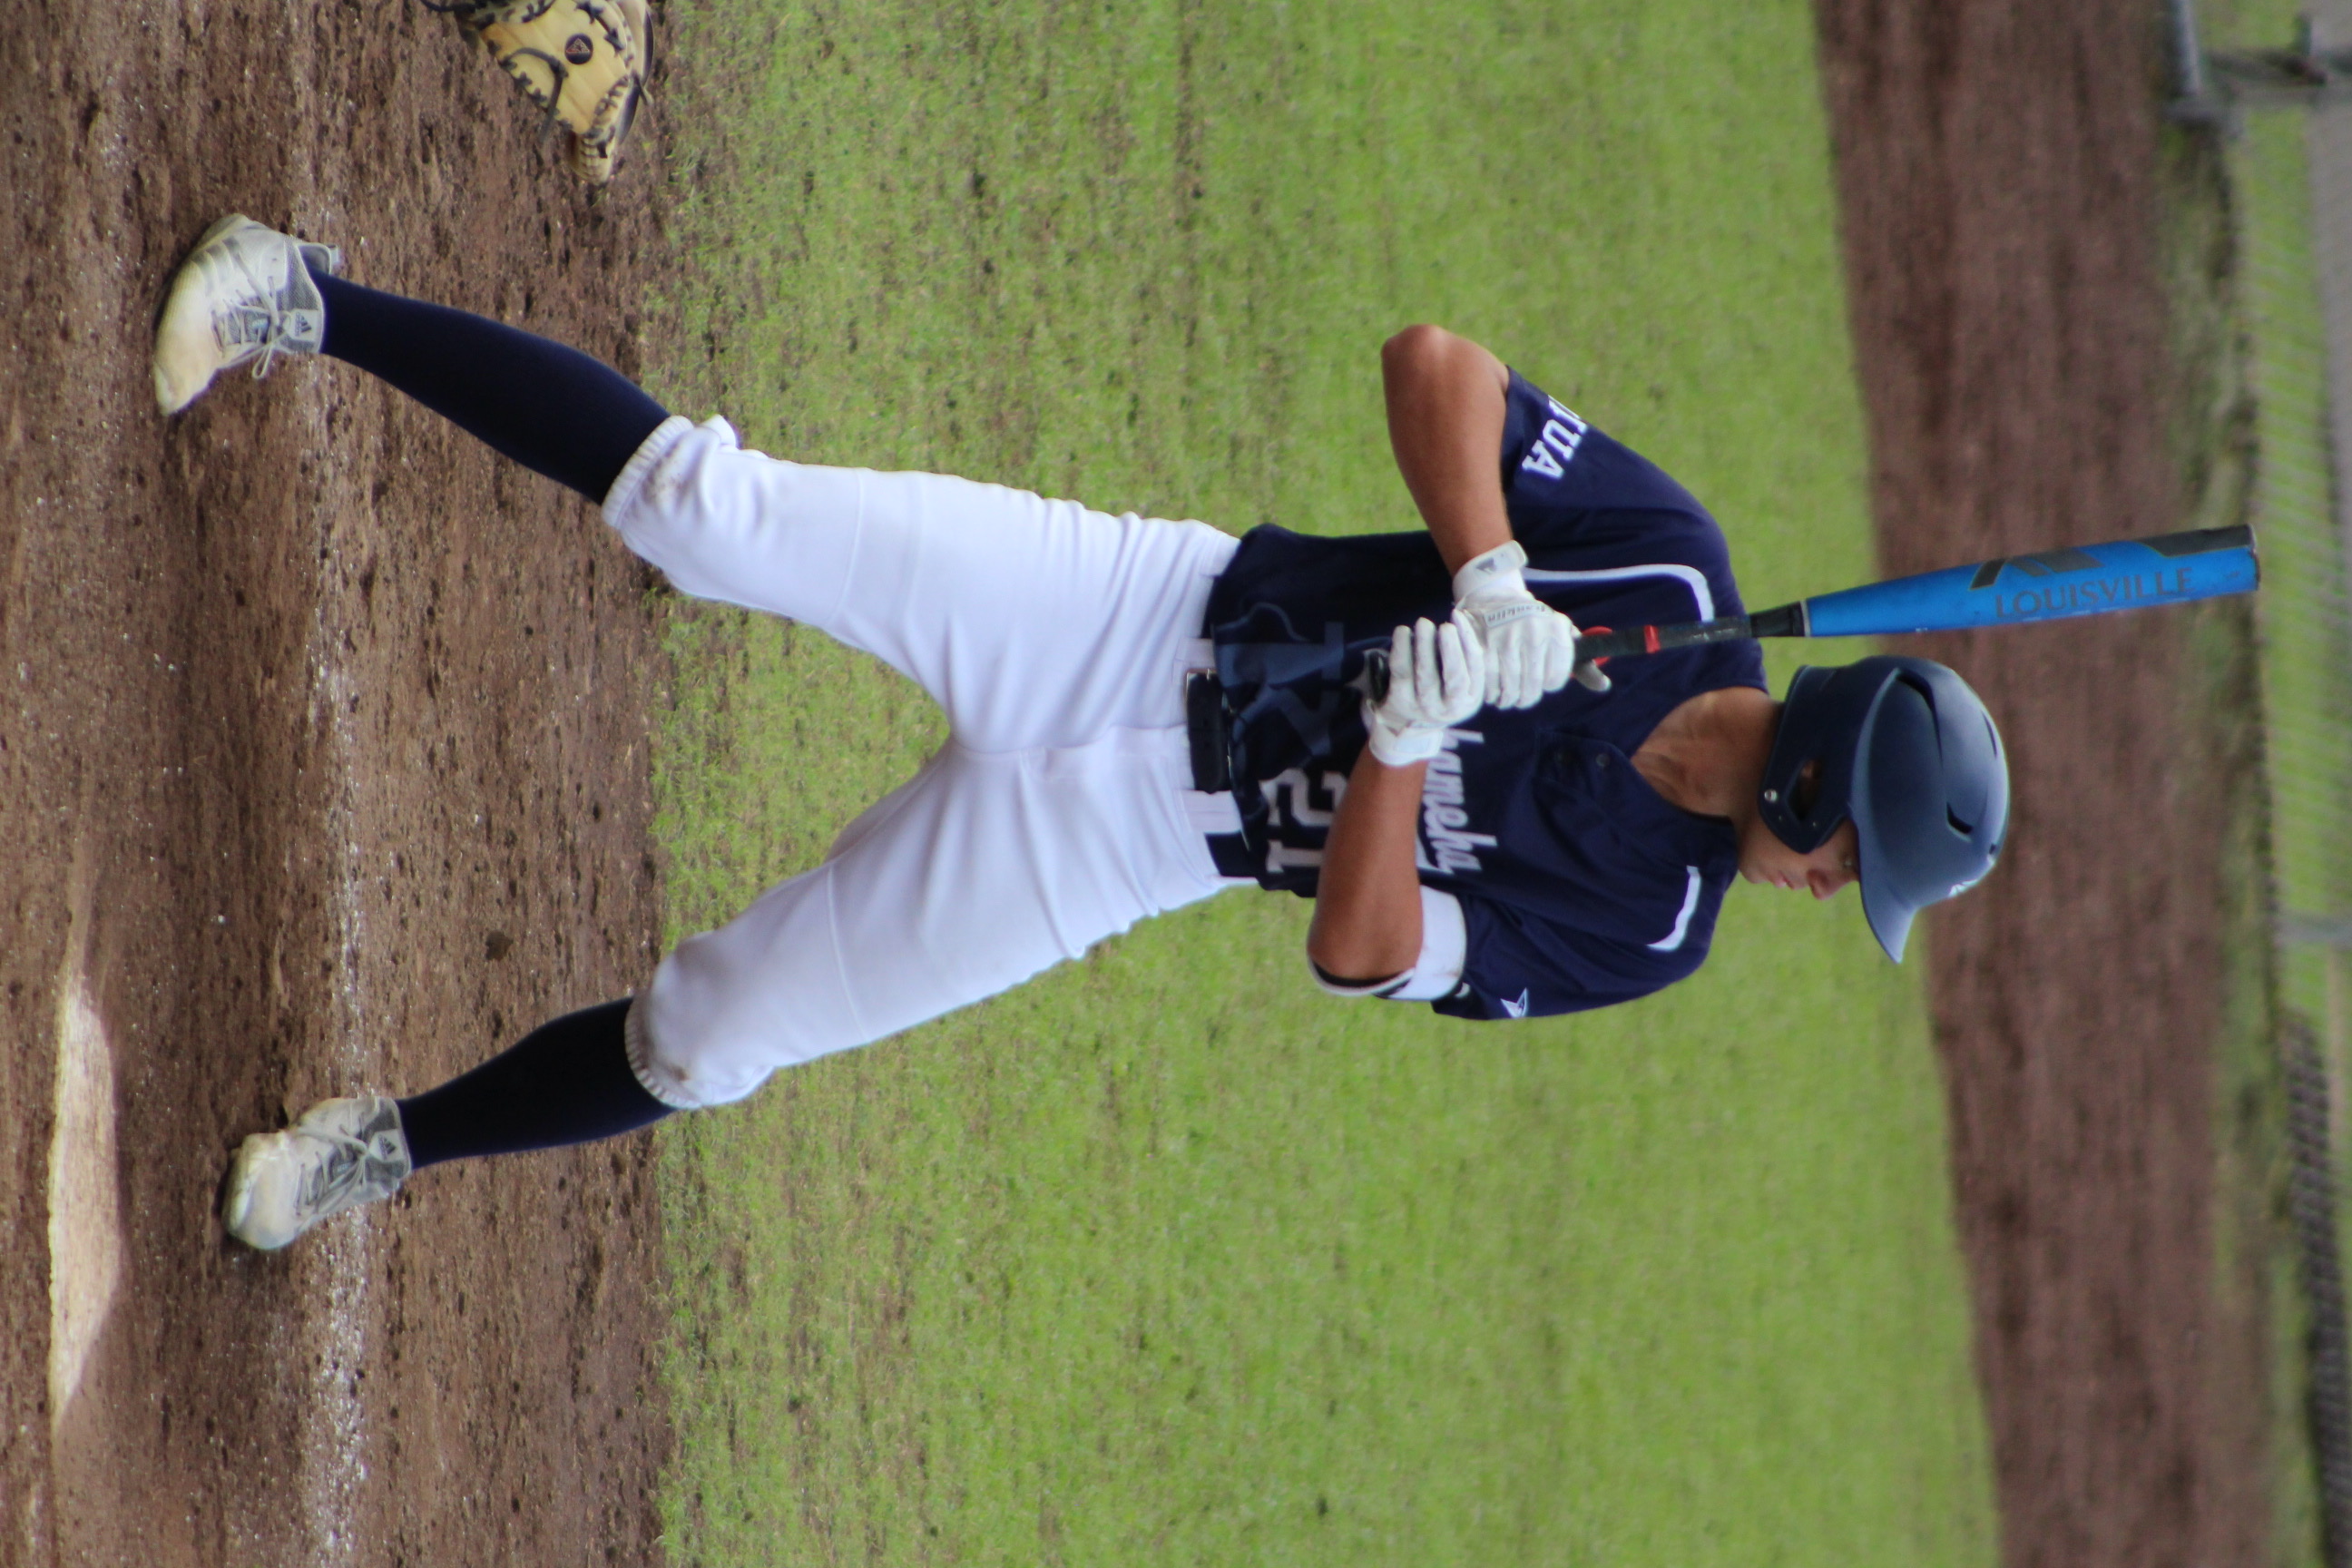 Check out the photos and videos of the baseball recruiting profile Jonah Reich